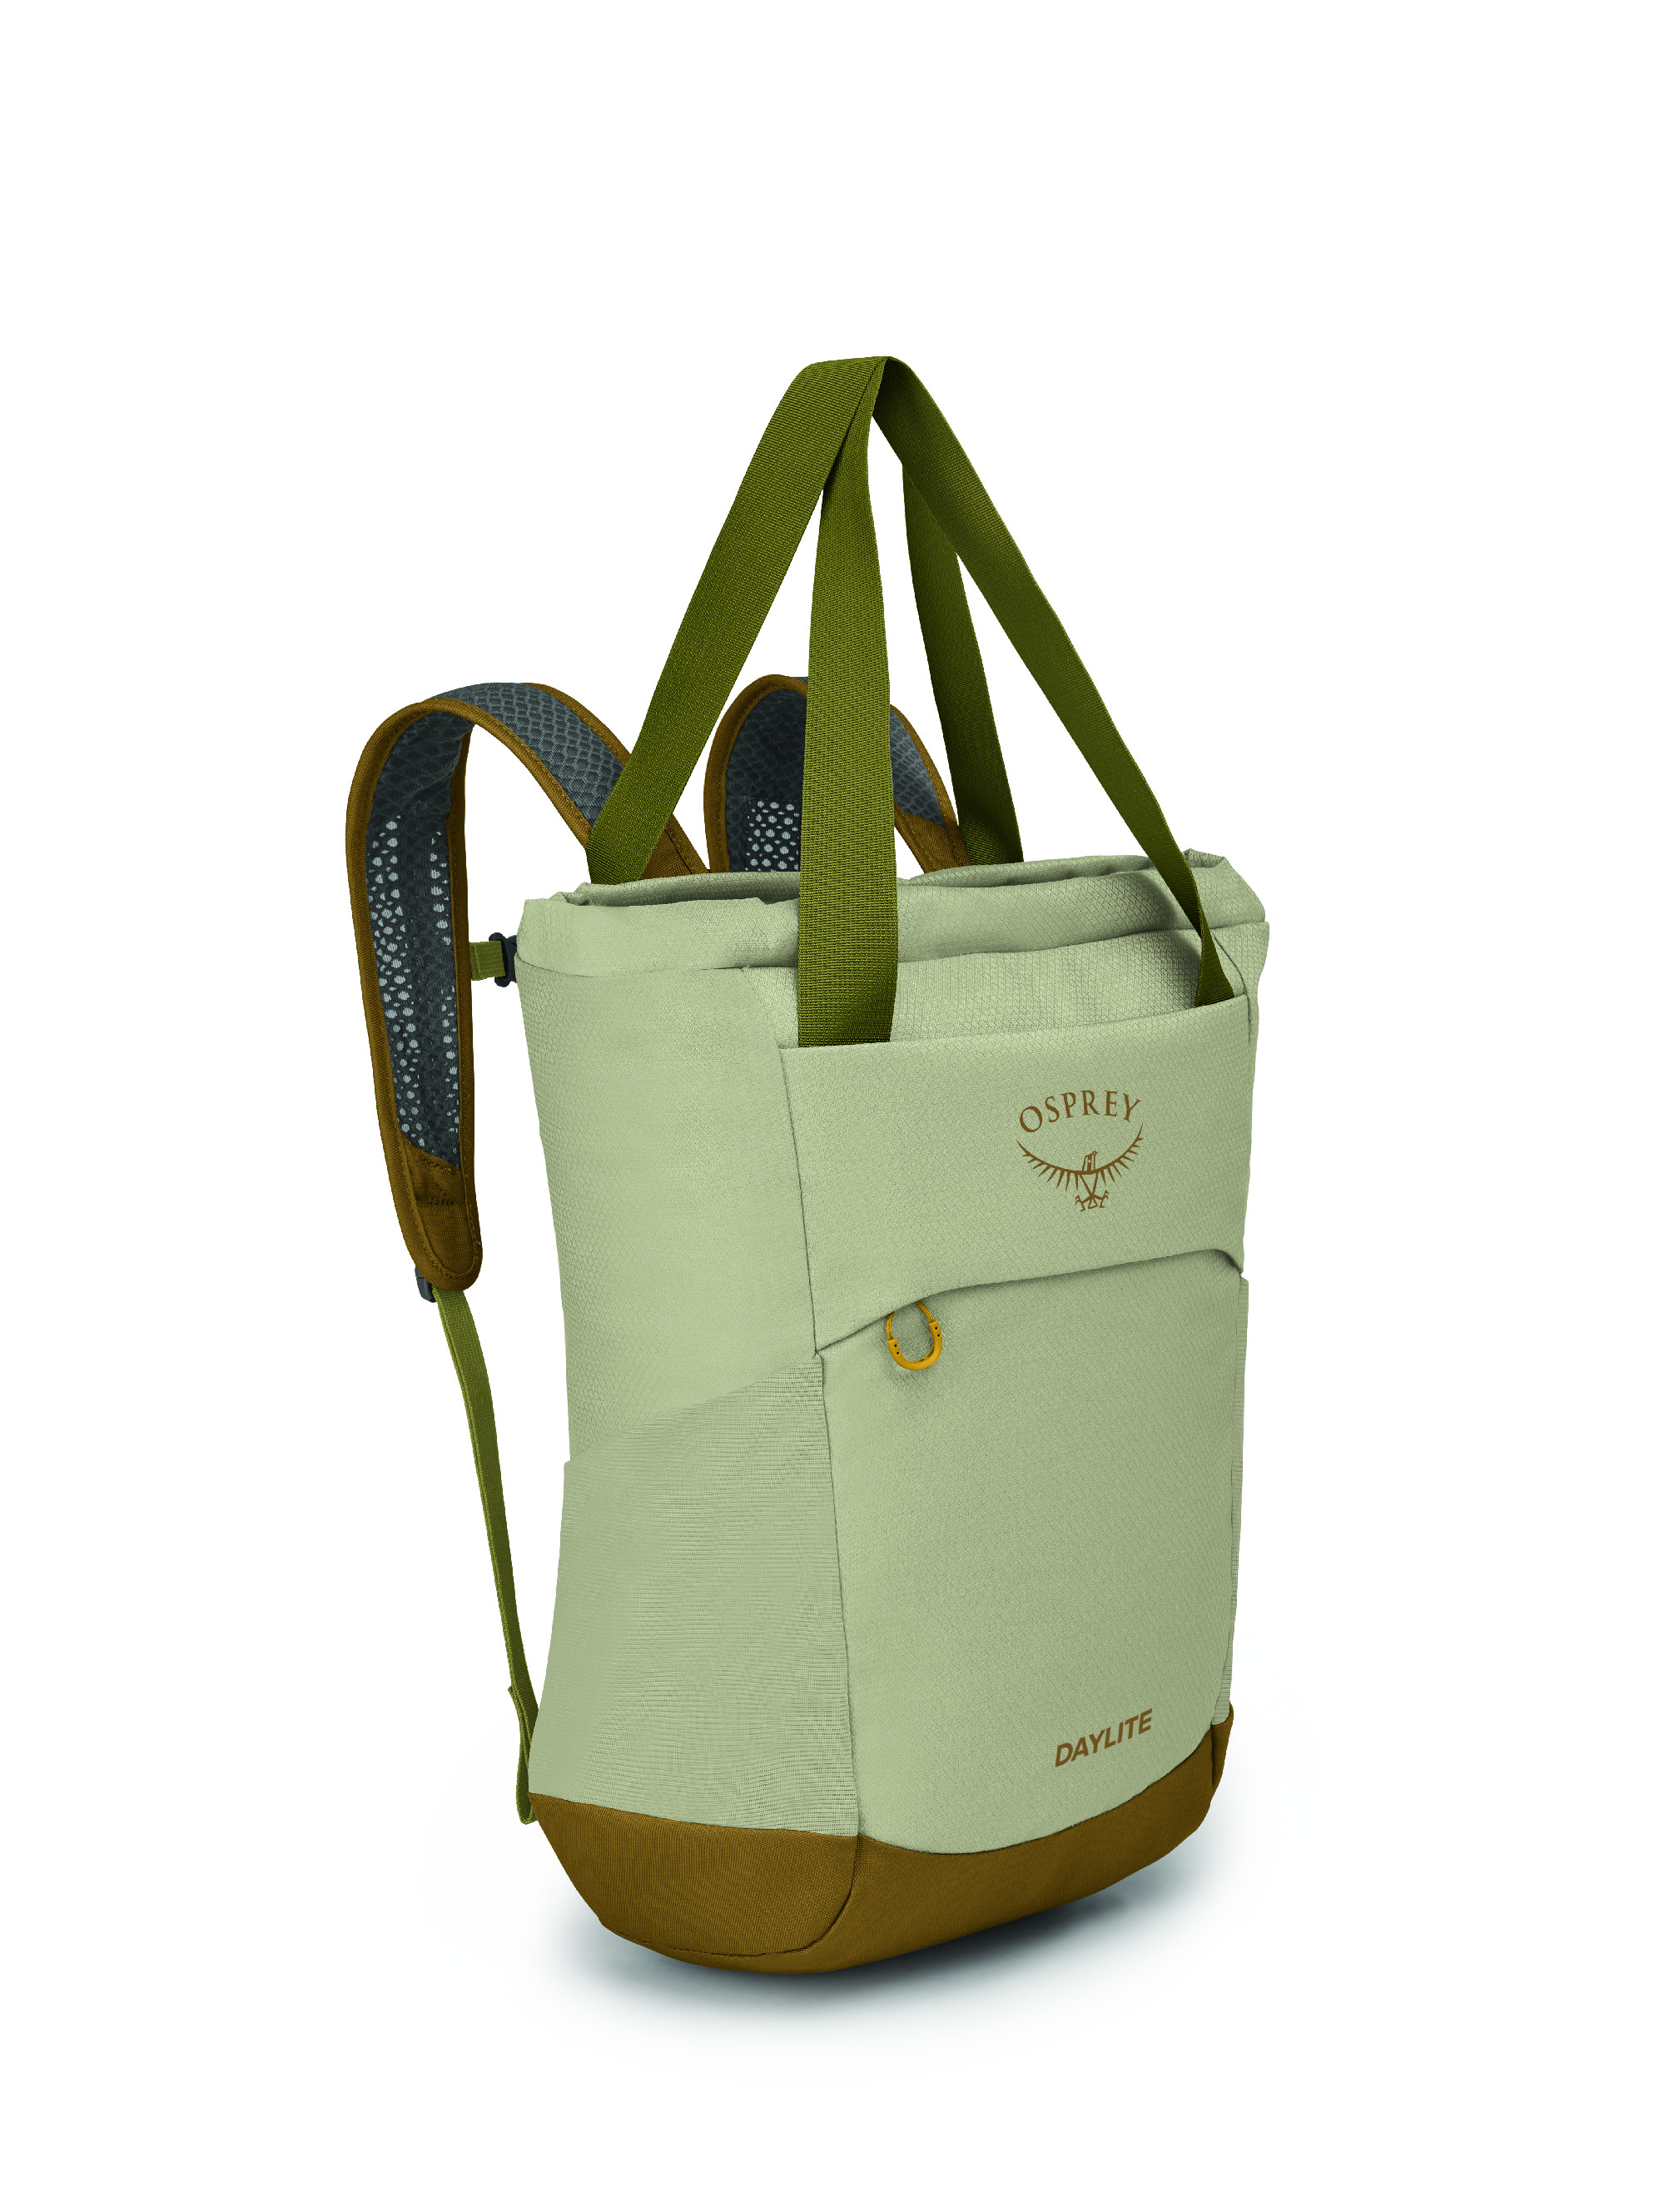 OSPREY DAYLITE TOTE PACK Barva: meadow gray/histosol brown